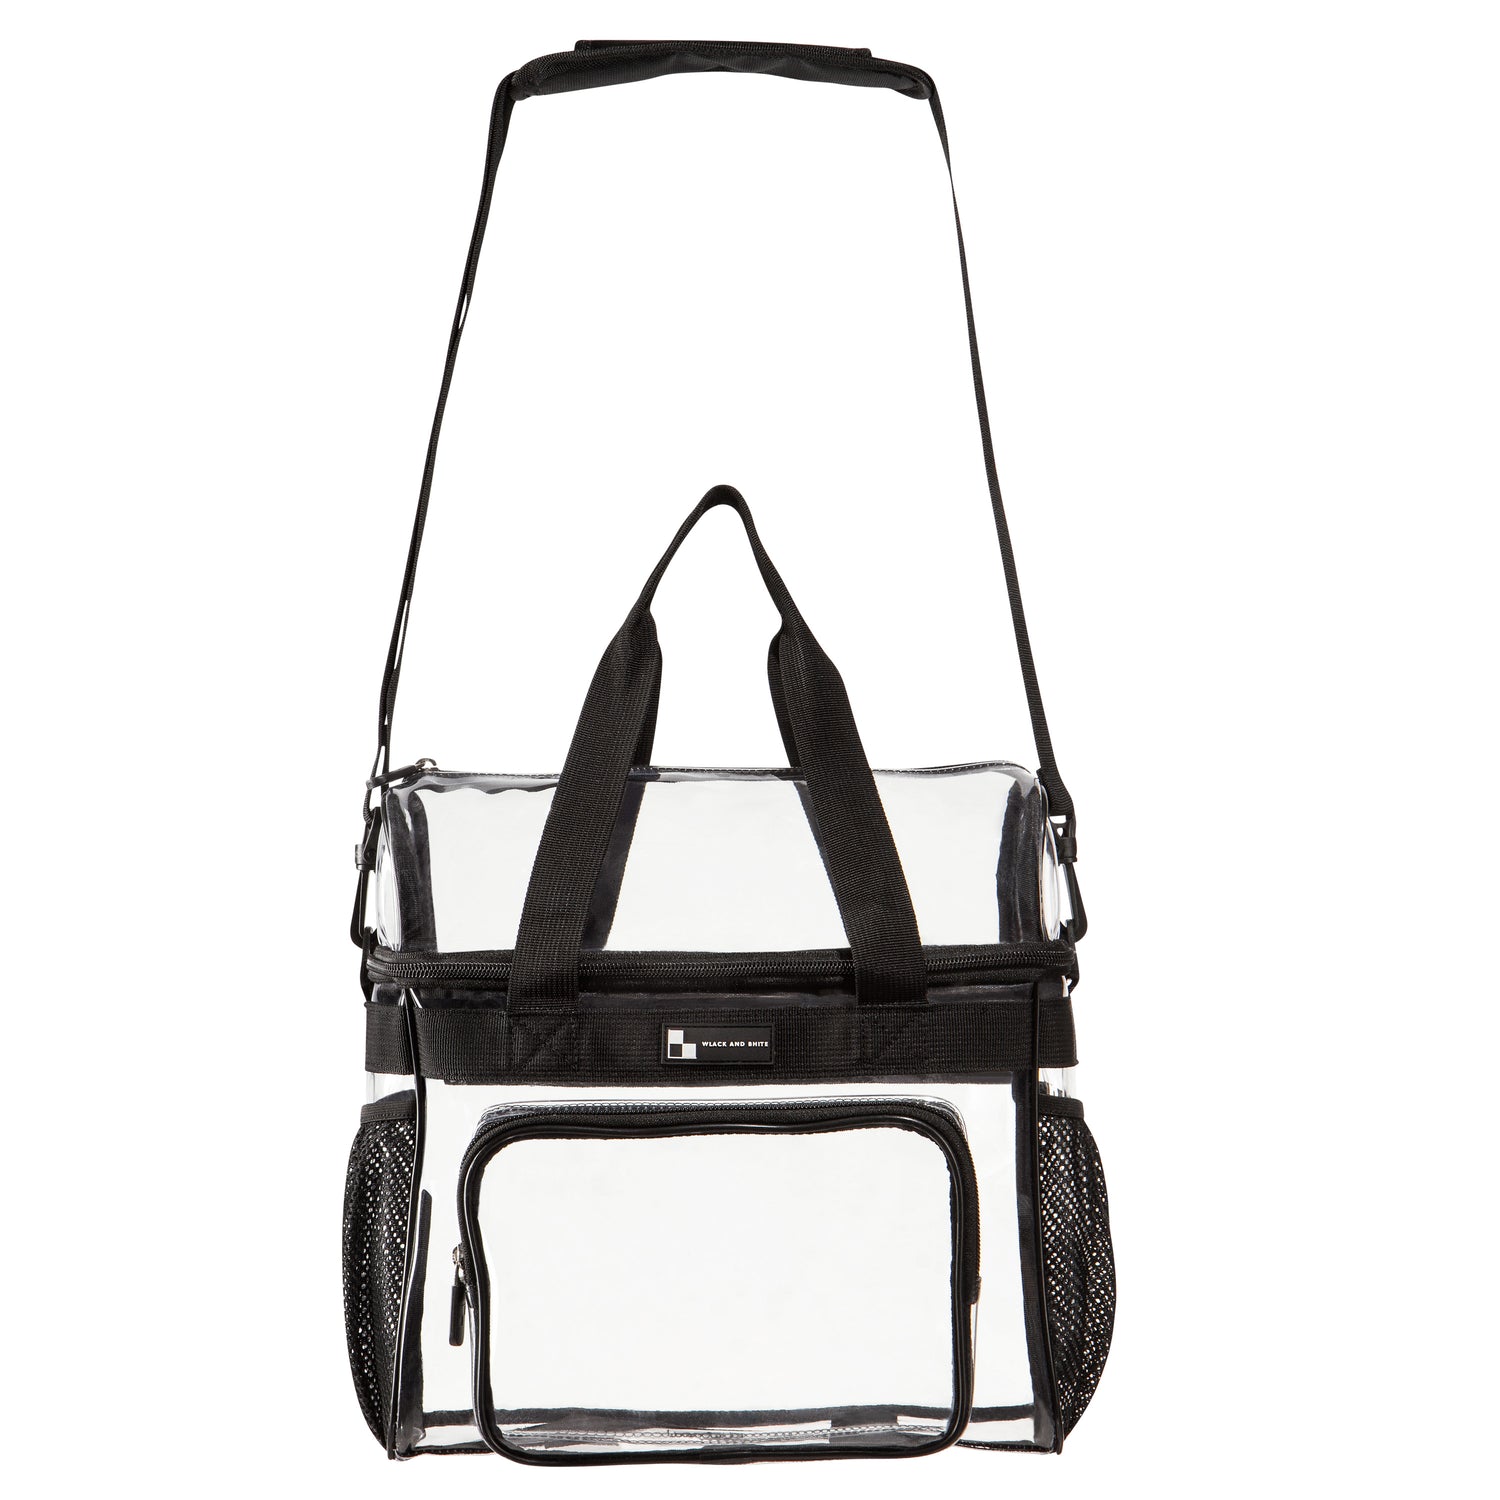 Heavy Duty Clear Stadium Approved Bags, Lunch Tote with Top Pocket (Large)